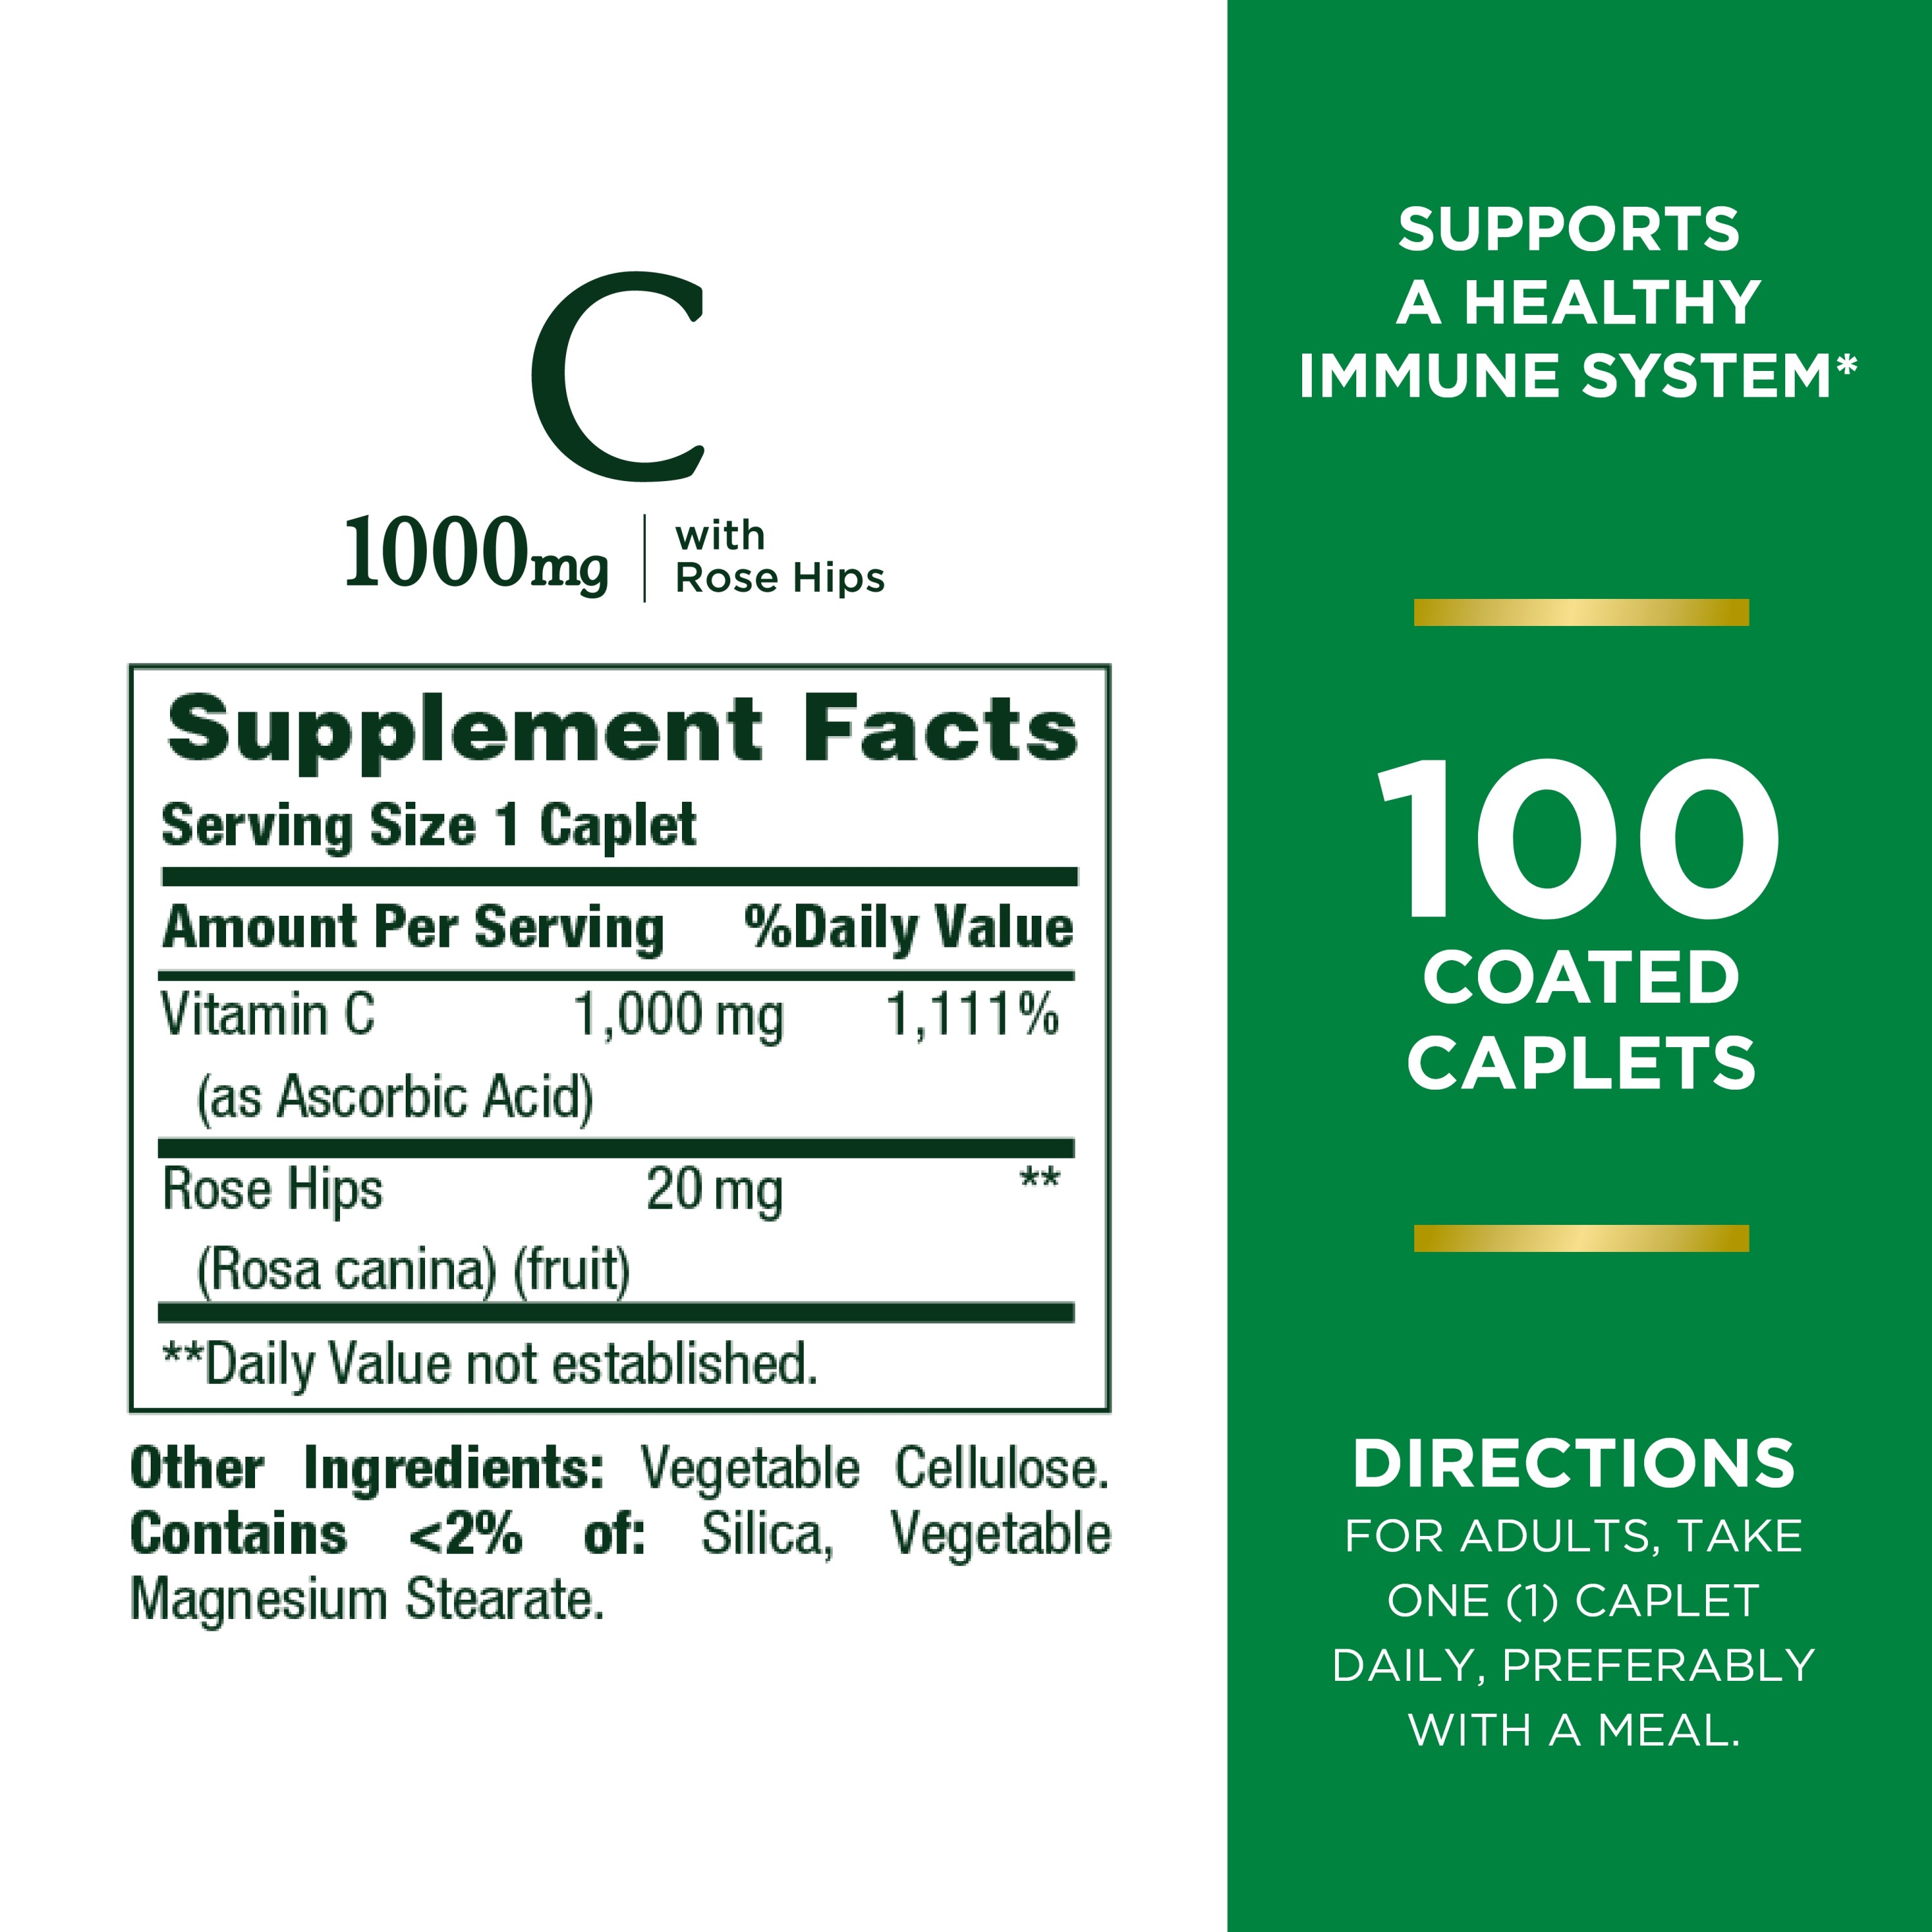 Nature’s Bounty Vitamin C + Rose Hips, 1000mg, 100 Coated Caplets - image 3 of 8